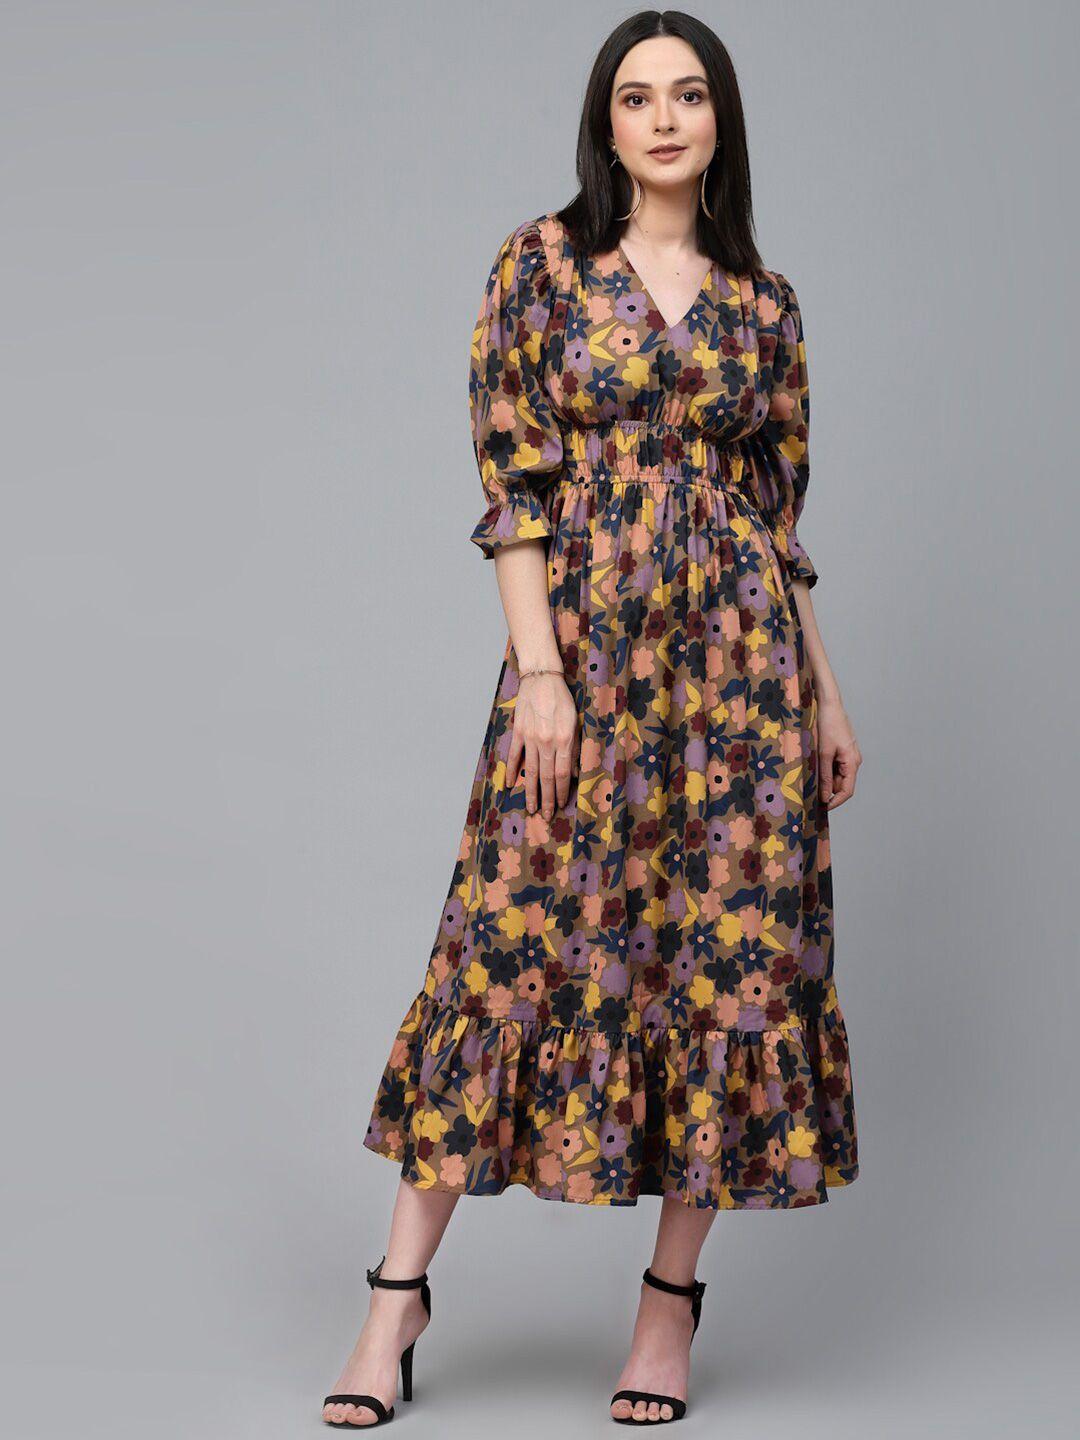 style quotient v-neck floral printed ruched fit and flare midi dress